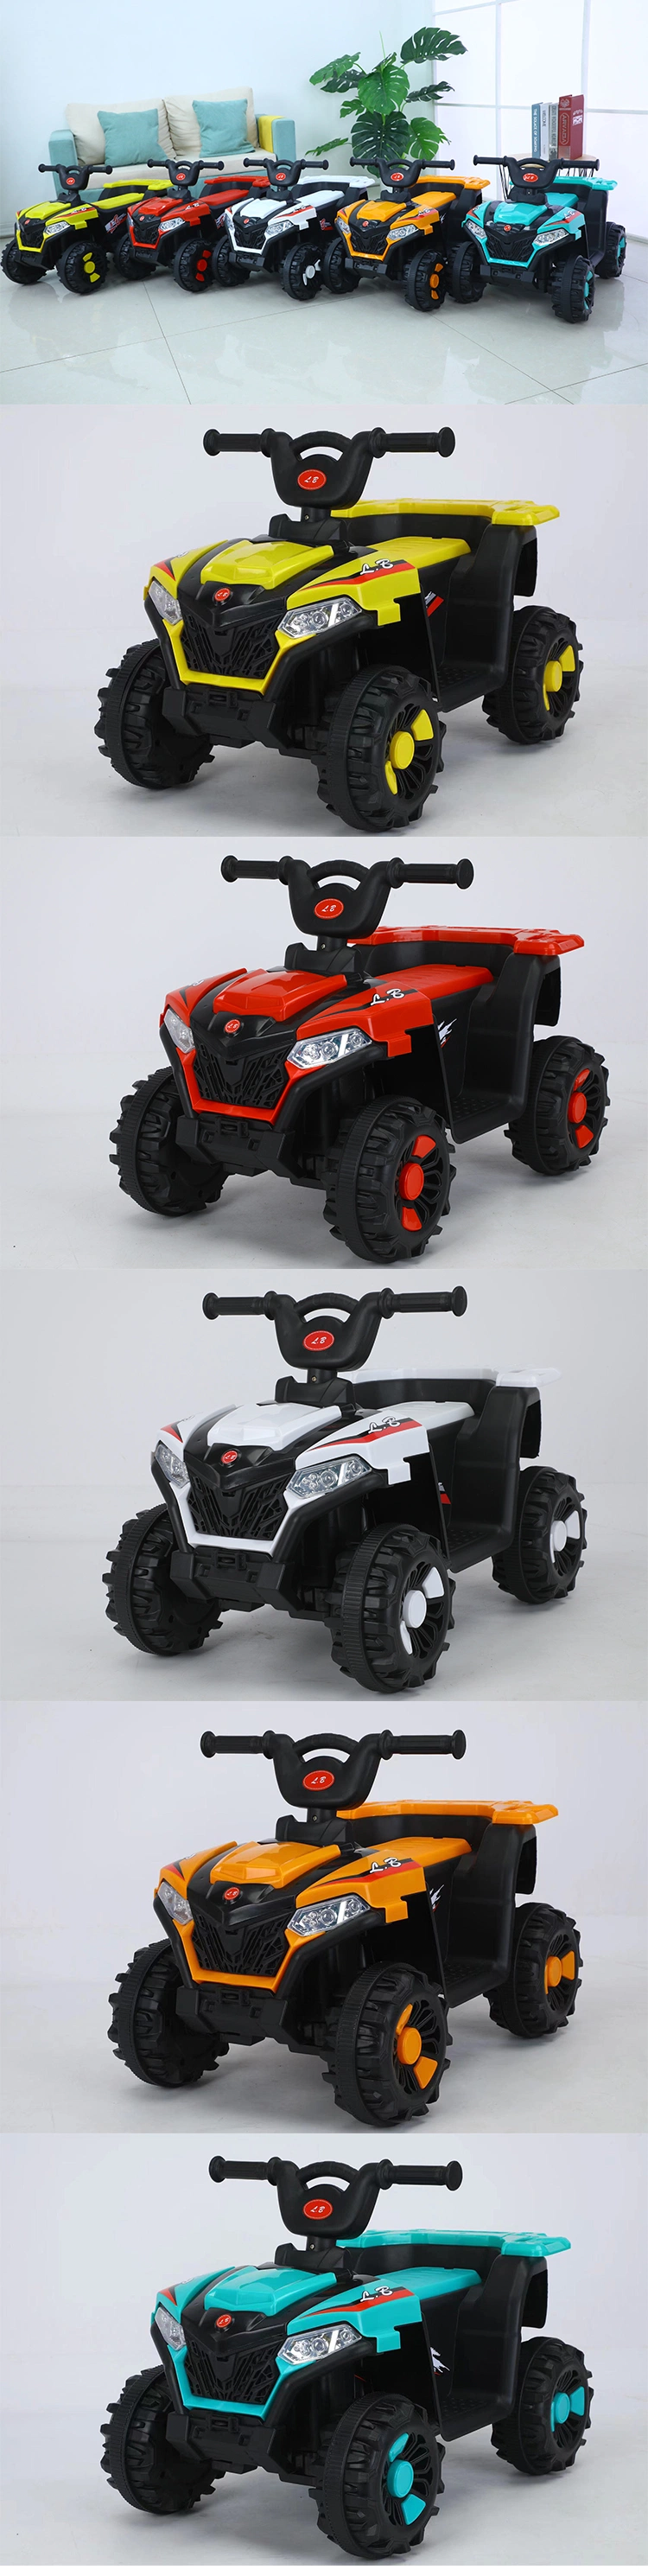 Electric Cars for Kids 12V Remote Control Ride on Car